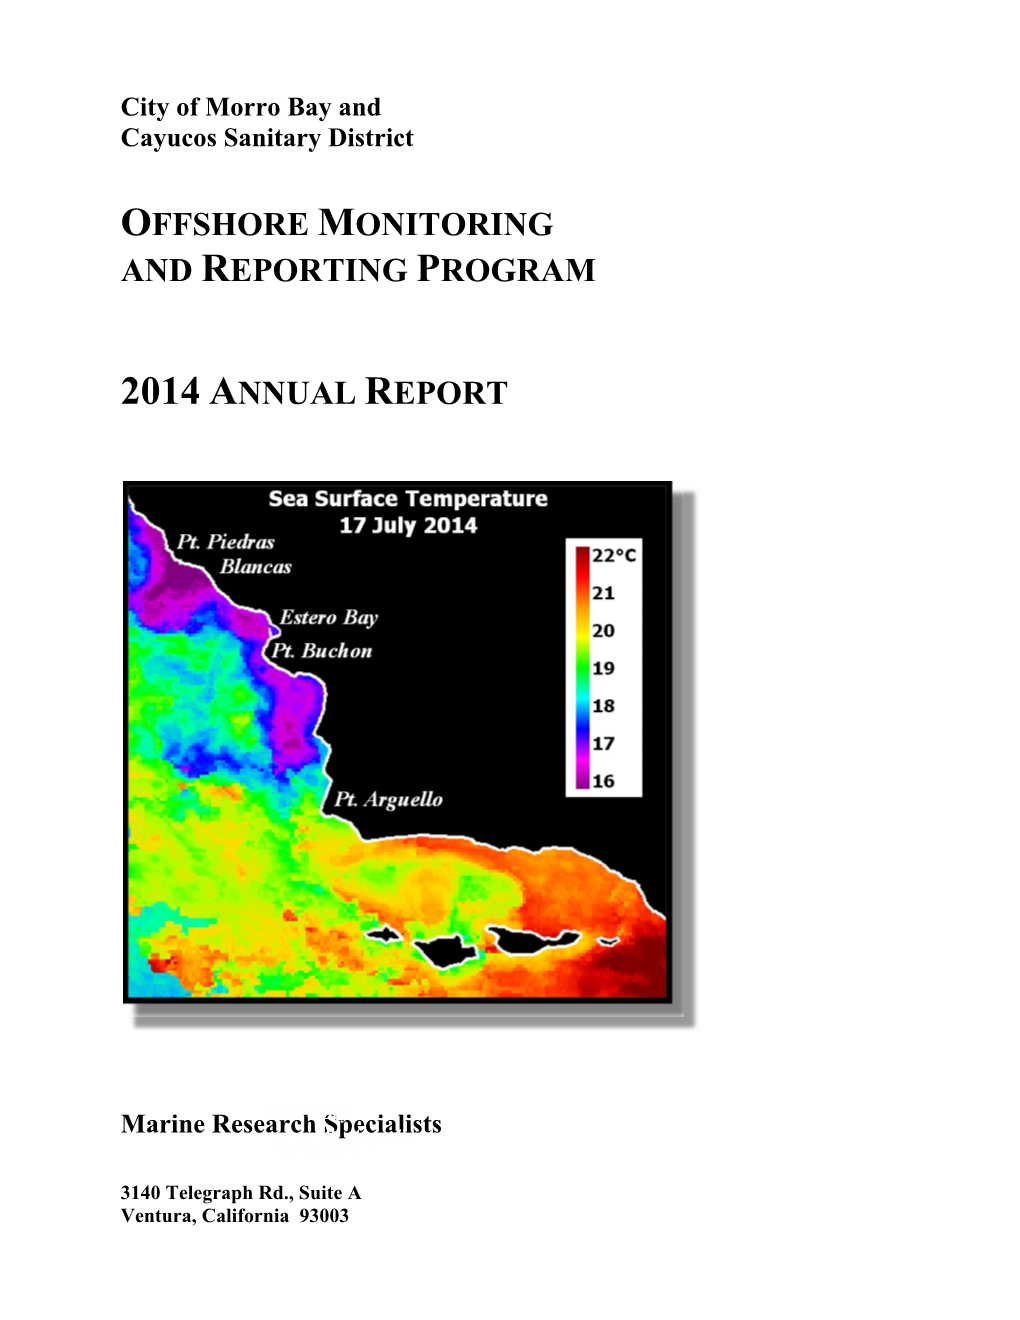 2014 Annual Monitoring Report